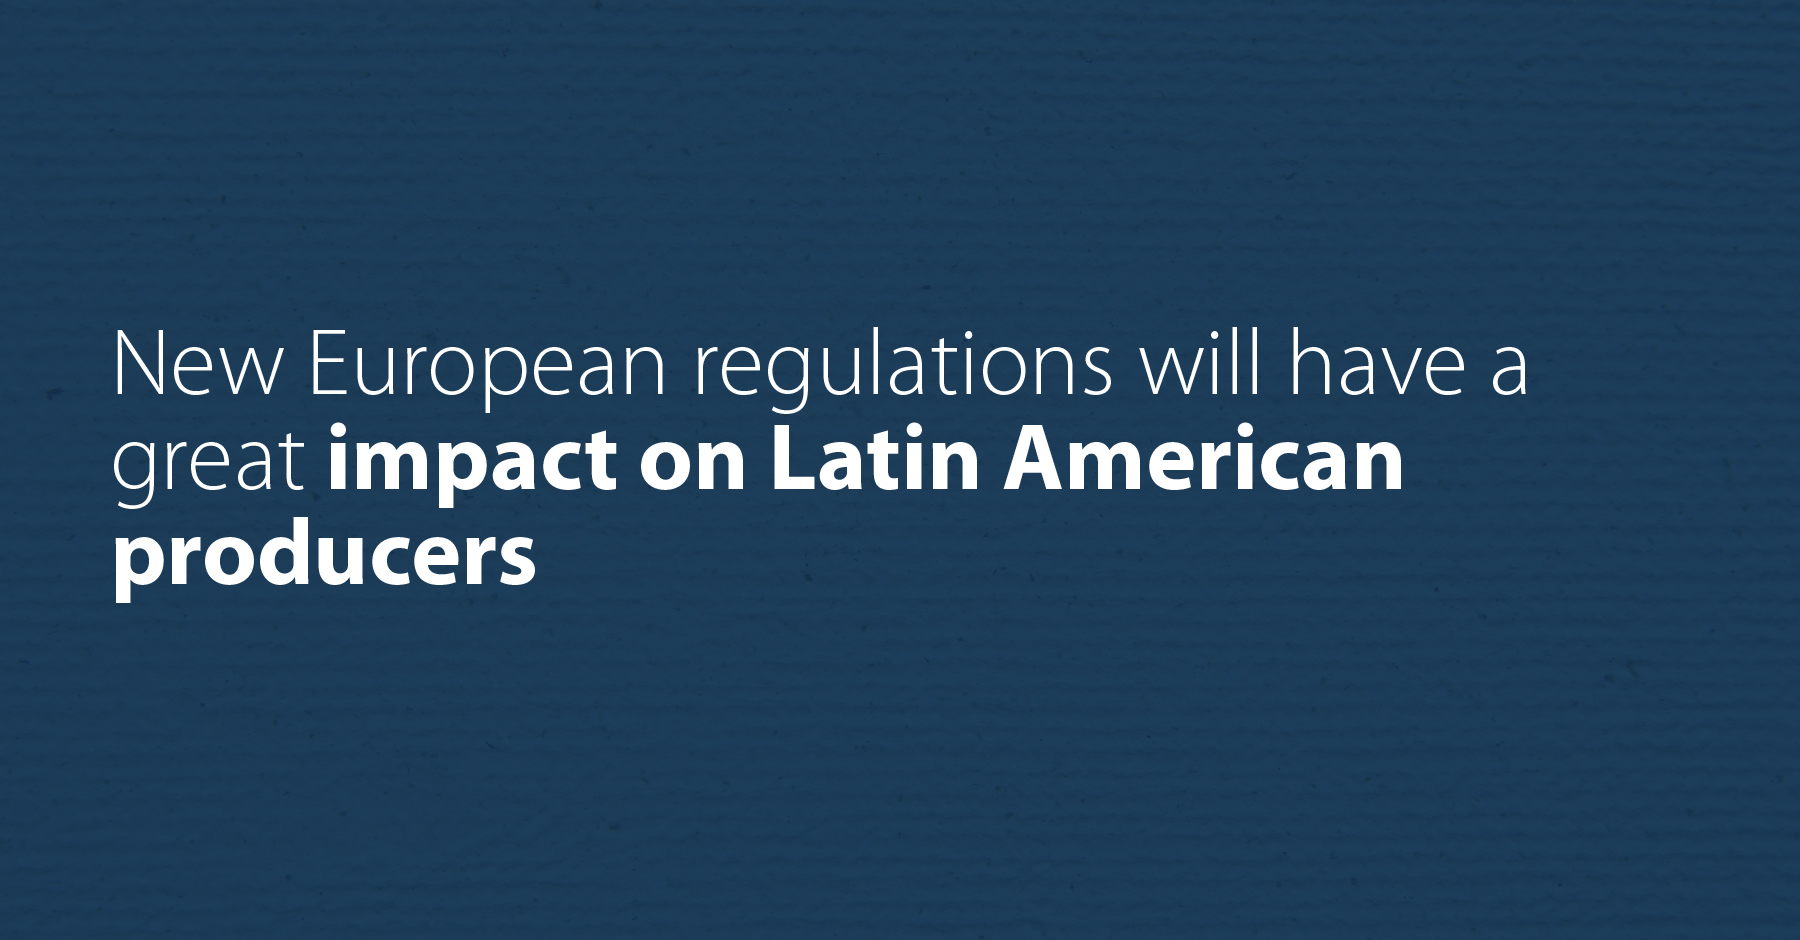 New European regulations will have a heavy impact on Latin American producers